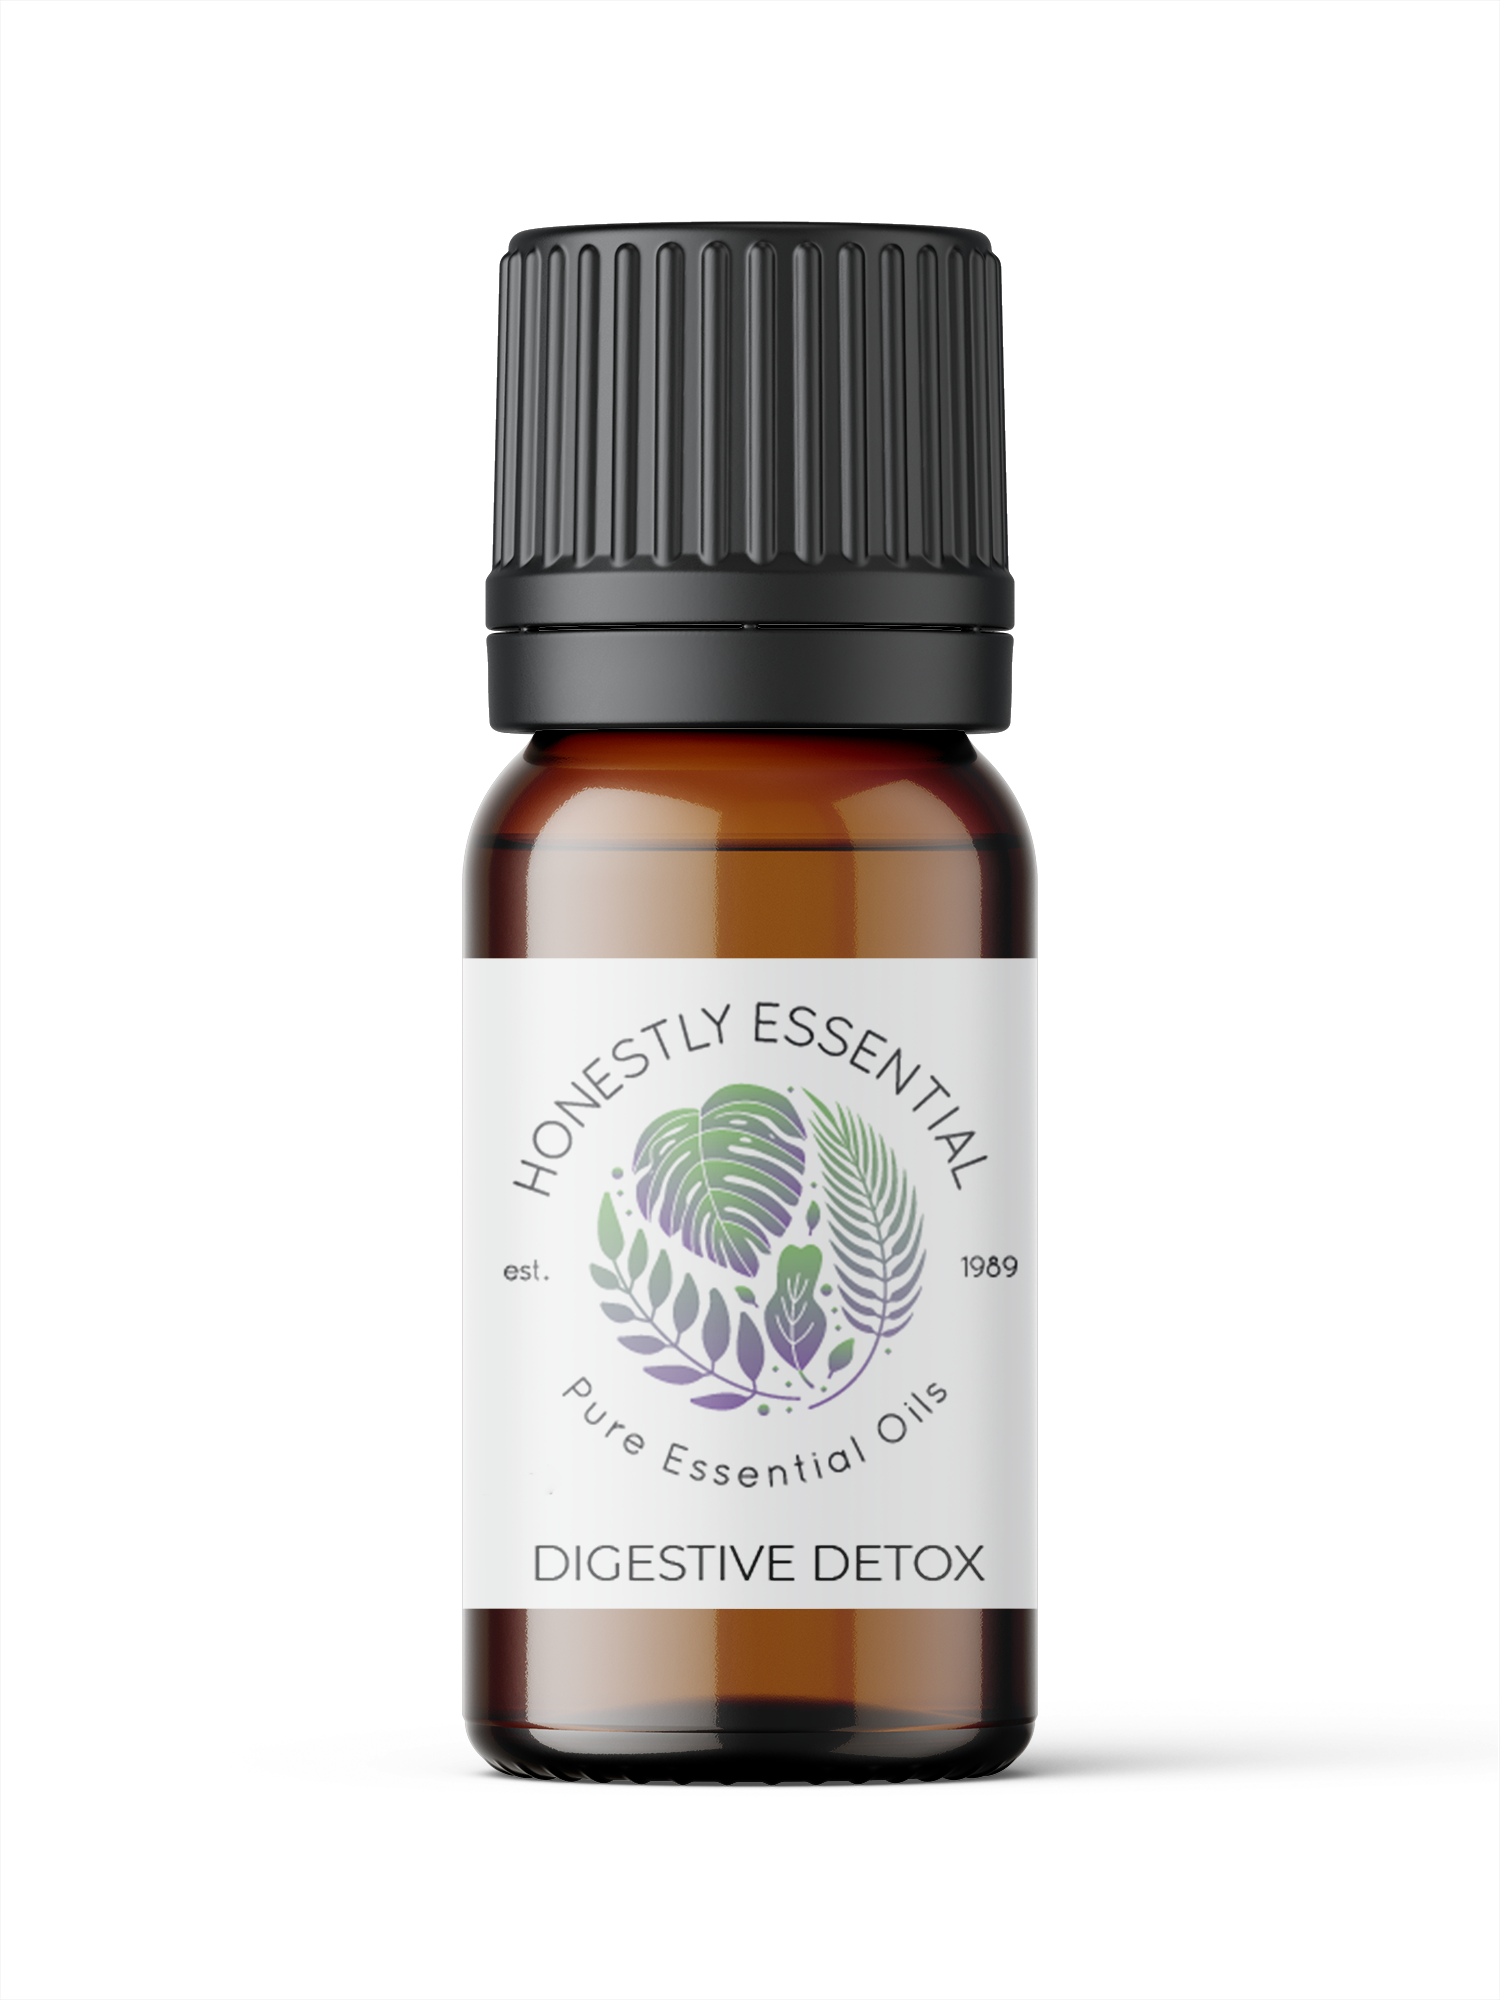 Digest Detox - Synergistic Blends | Honestly Essential Oils digestion, relaxation, relaxation and sleep, synergistic